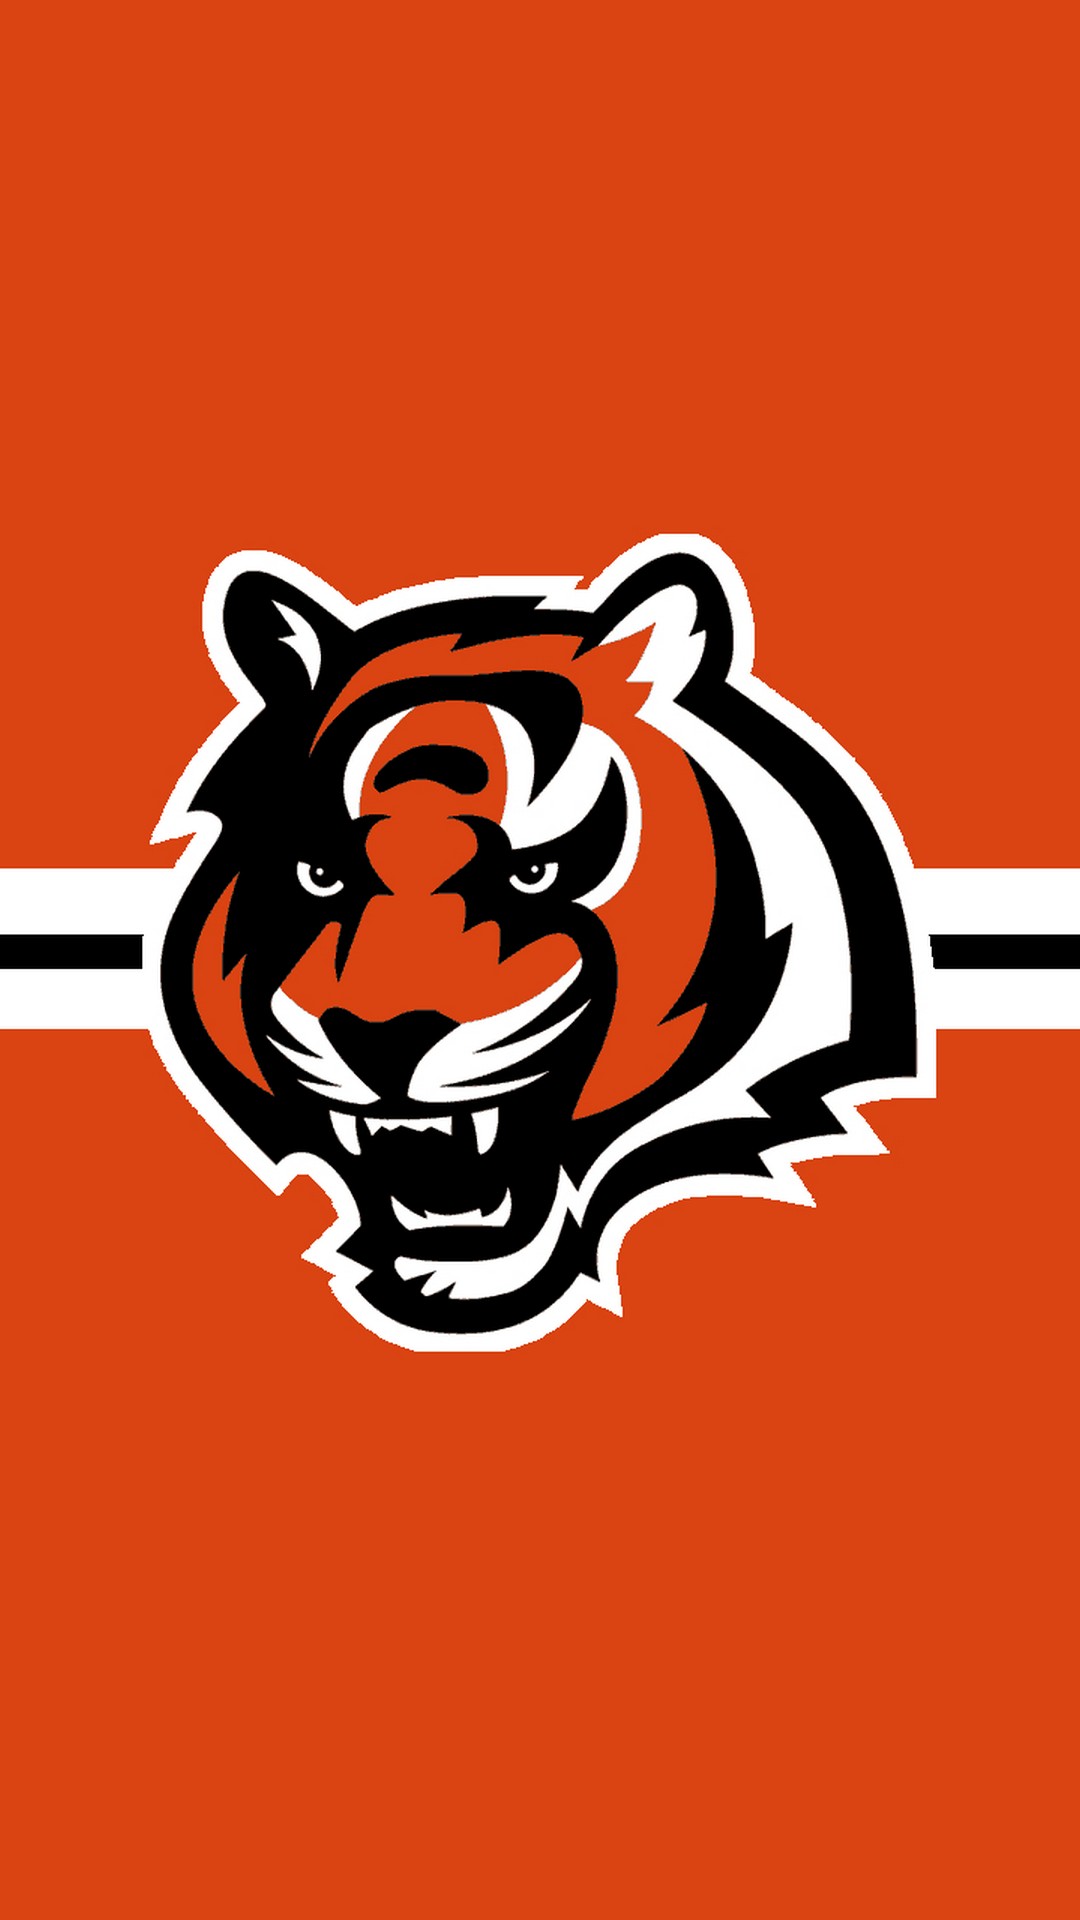 Cincinnati Bengals iPhone 7 Plus Wallpaper With high-resolution 1080X1920 pixel. Download and set as wallpaper for Apple iPhone X, XS Max, XR, 8, 7, 6, SE, iPad, Android